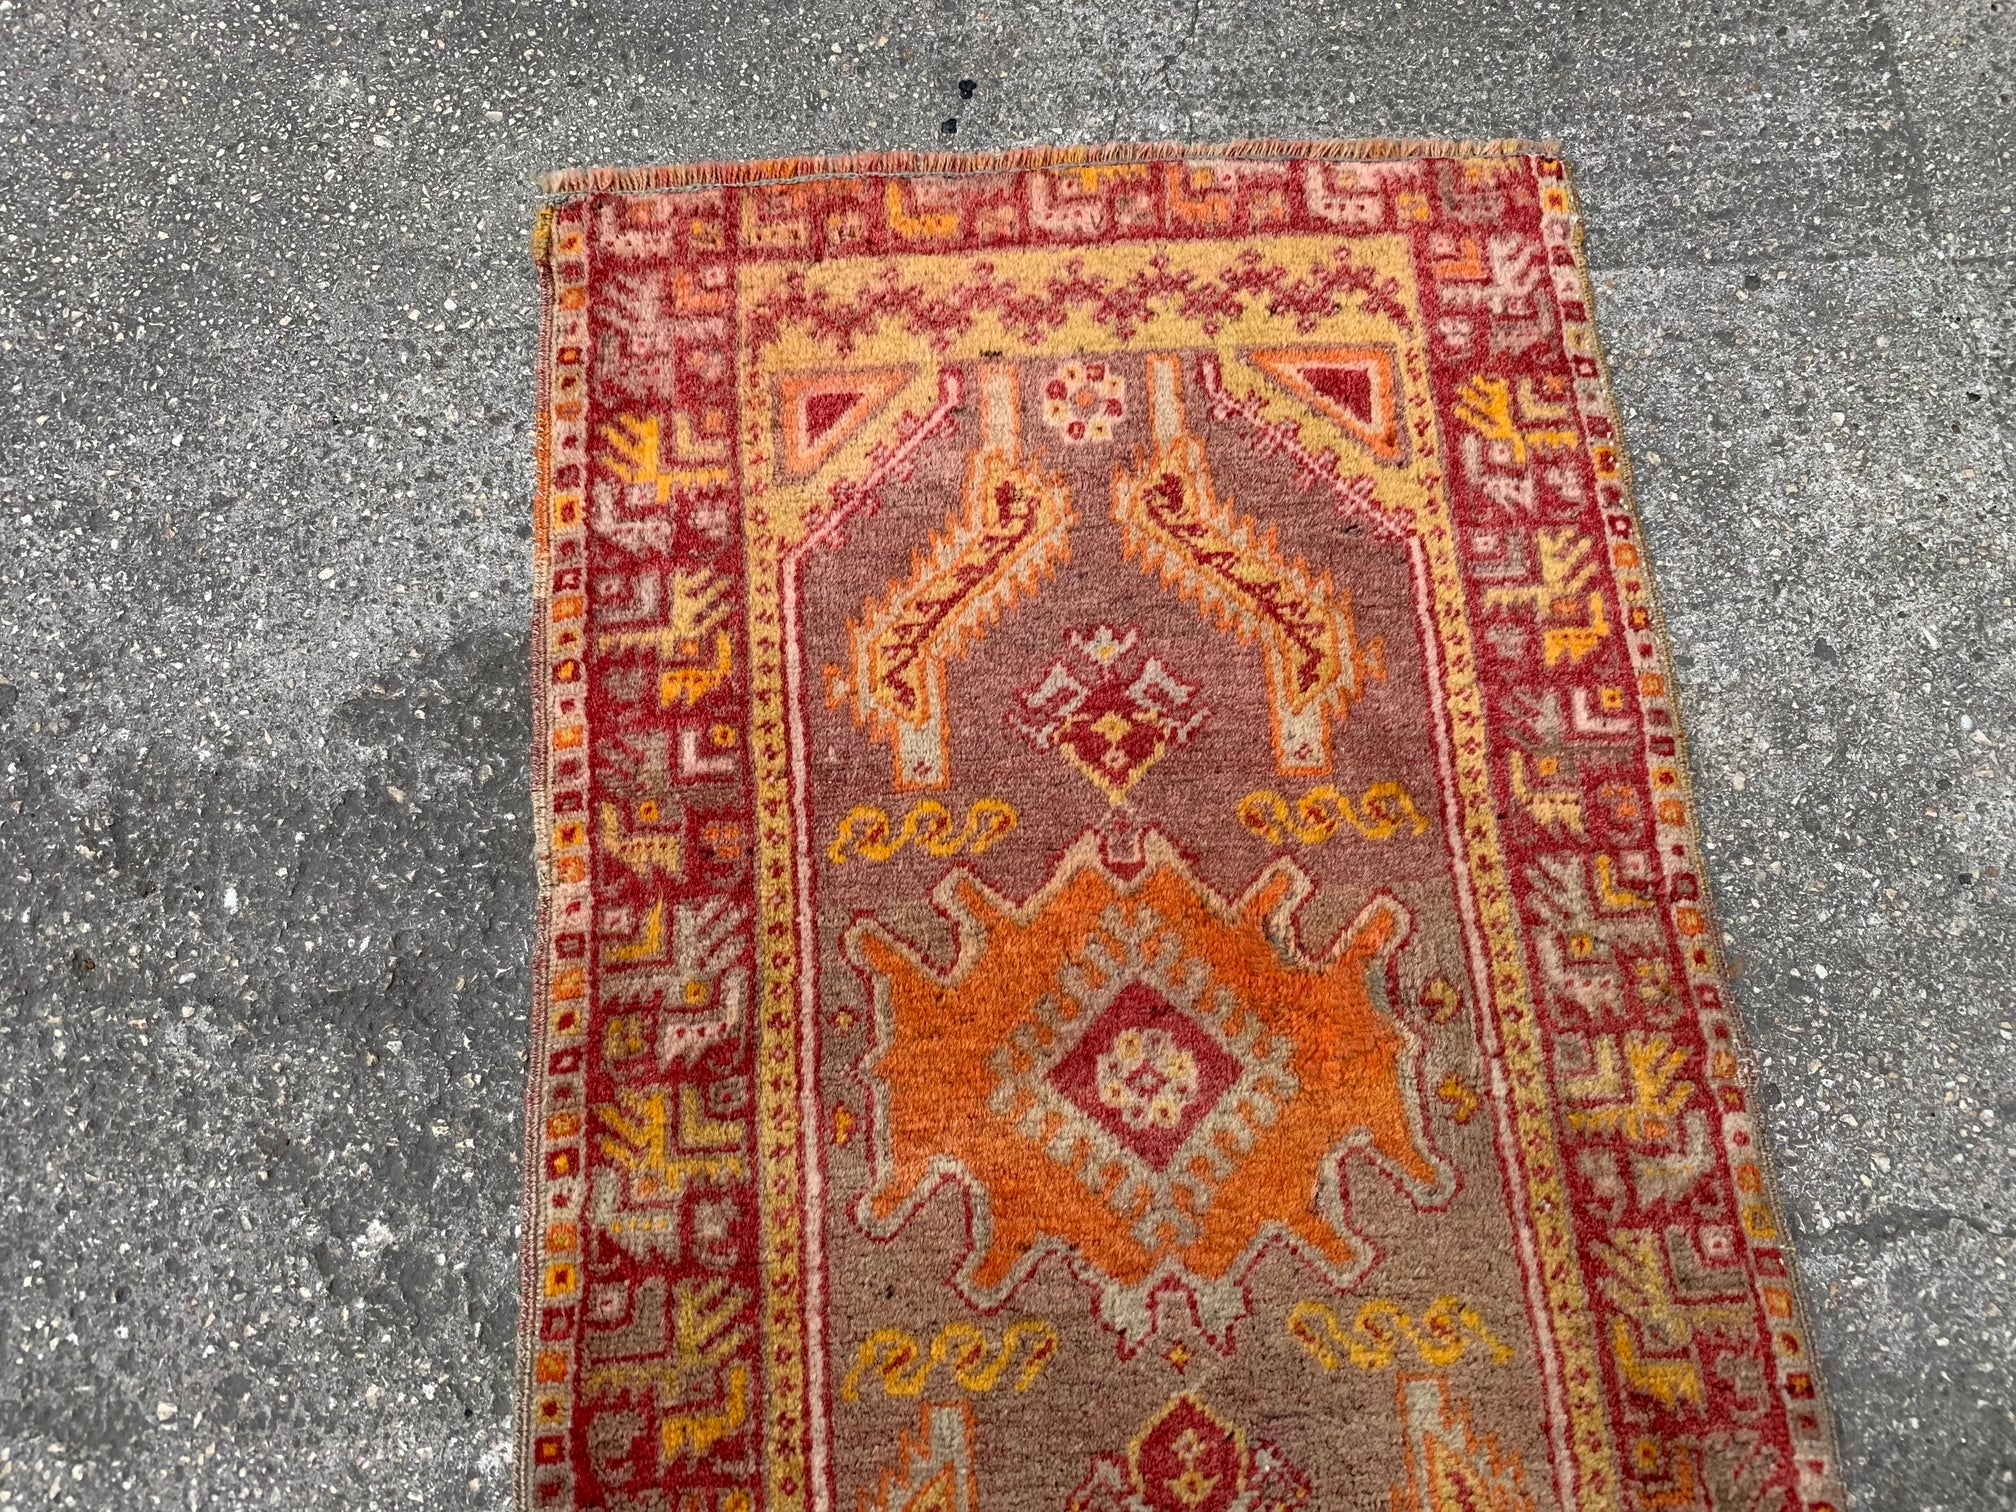 Vintage small rug, 1.7x2.11 ft, s780